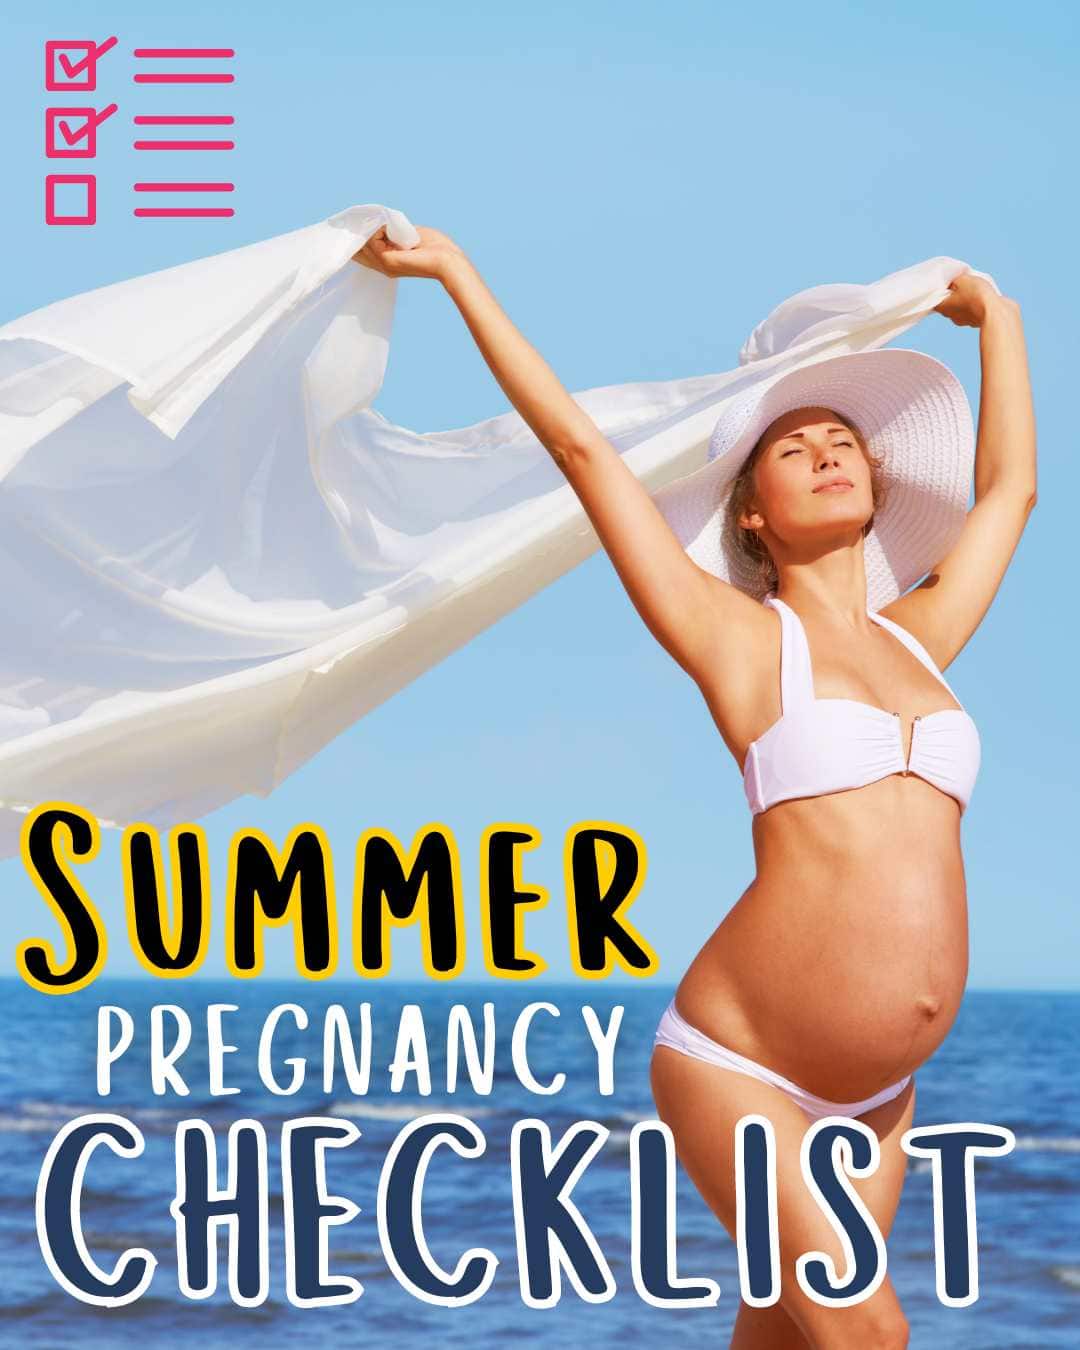 pregnant woman with a sheet in the wind / summer pregnancy checklist via @pullingcurls